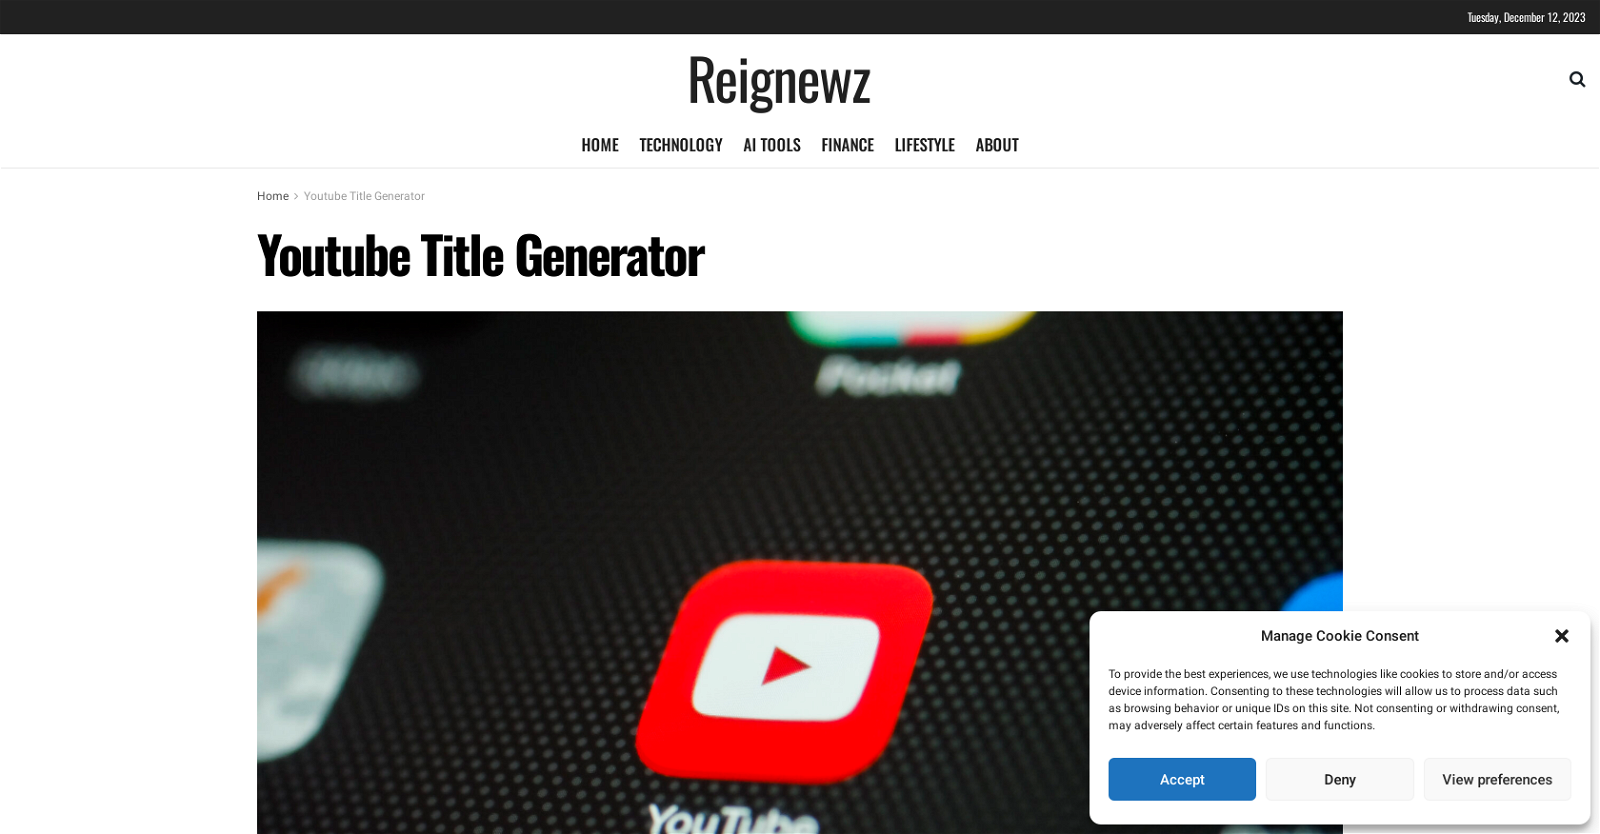 YouTube Titles by Reignewz website